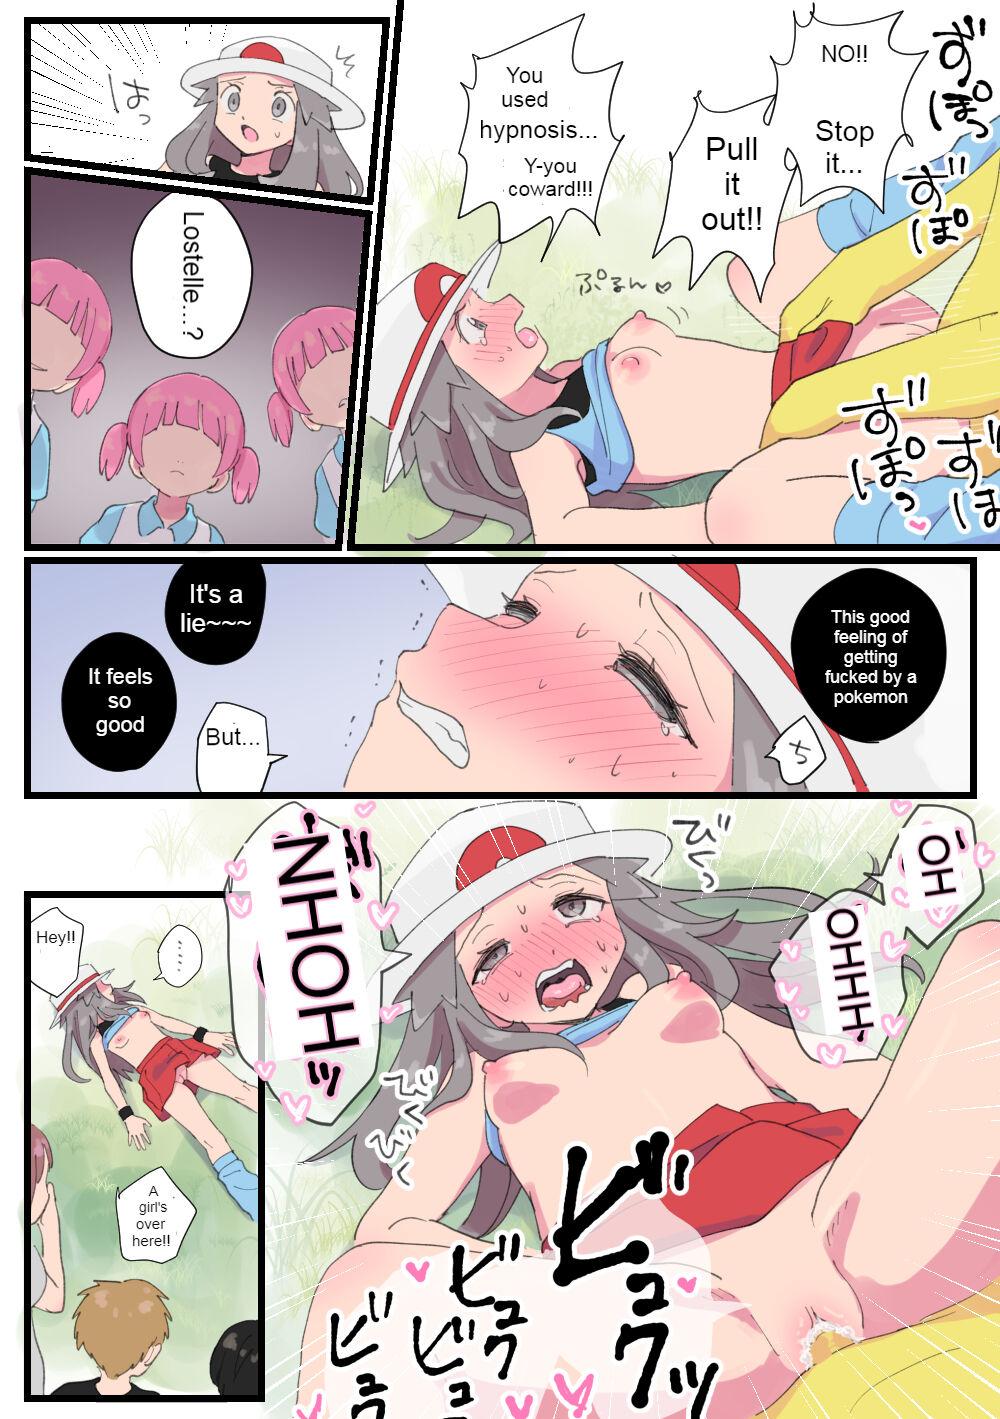 Hardcore Fucking Leaf goes to help Mayo-chan and gets hypnotically raped by Hypno - Pokemon | pocket monsters Japan - Page 7